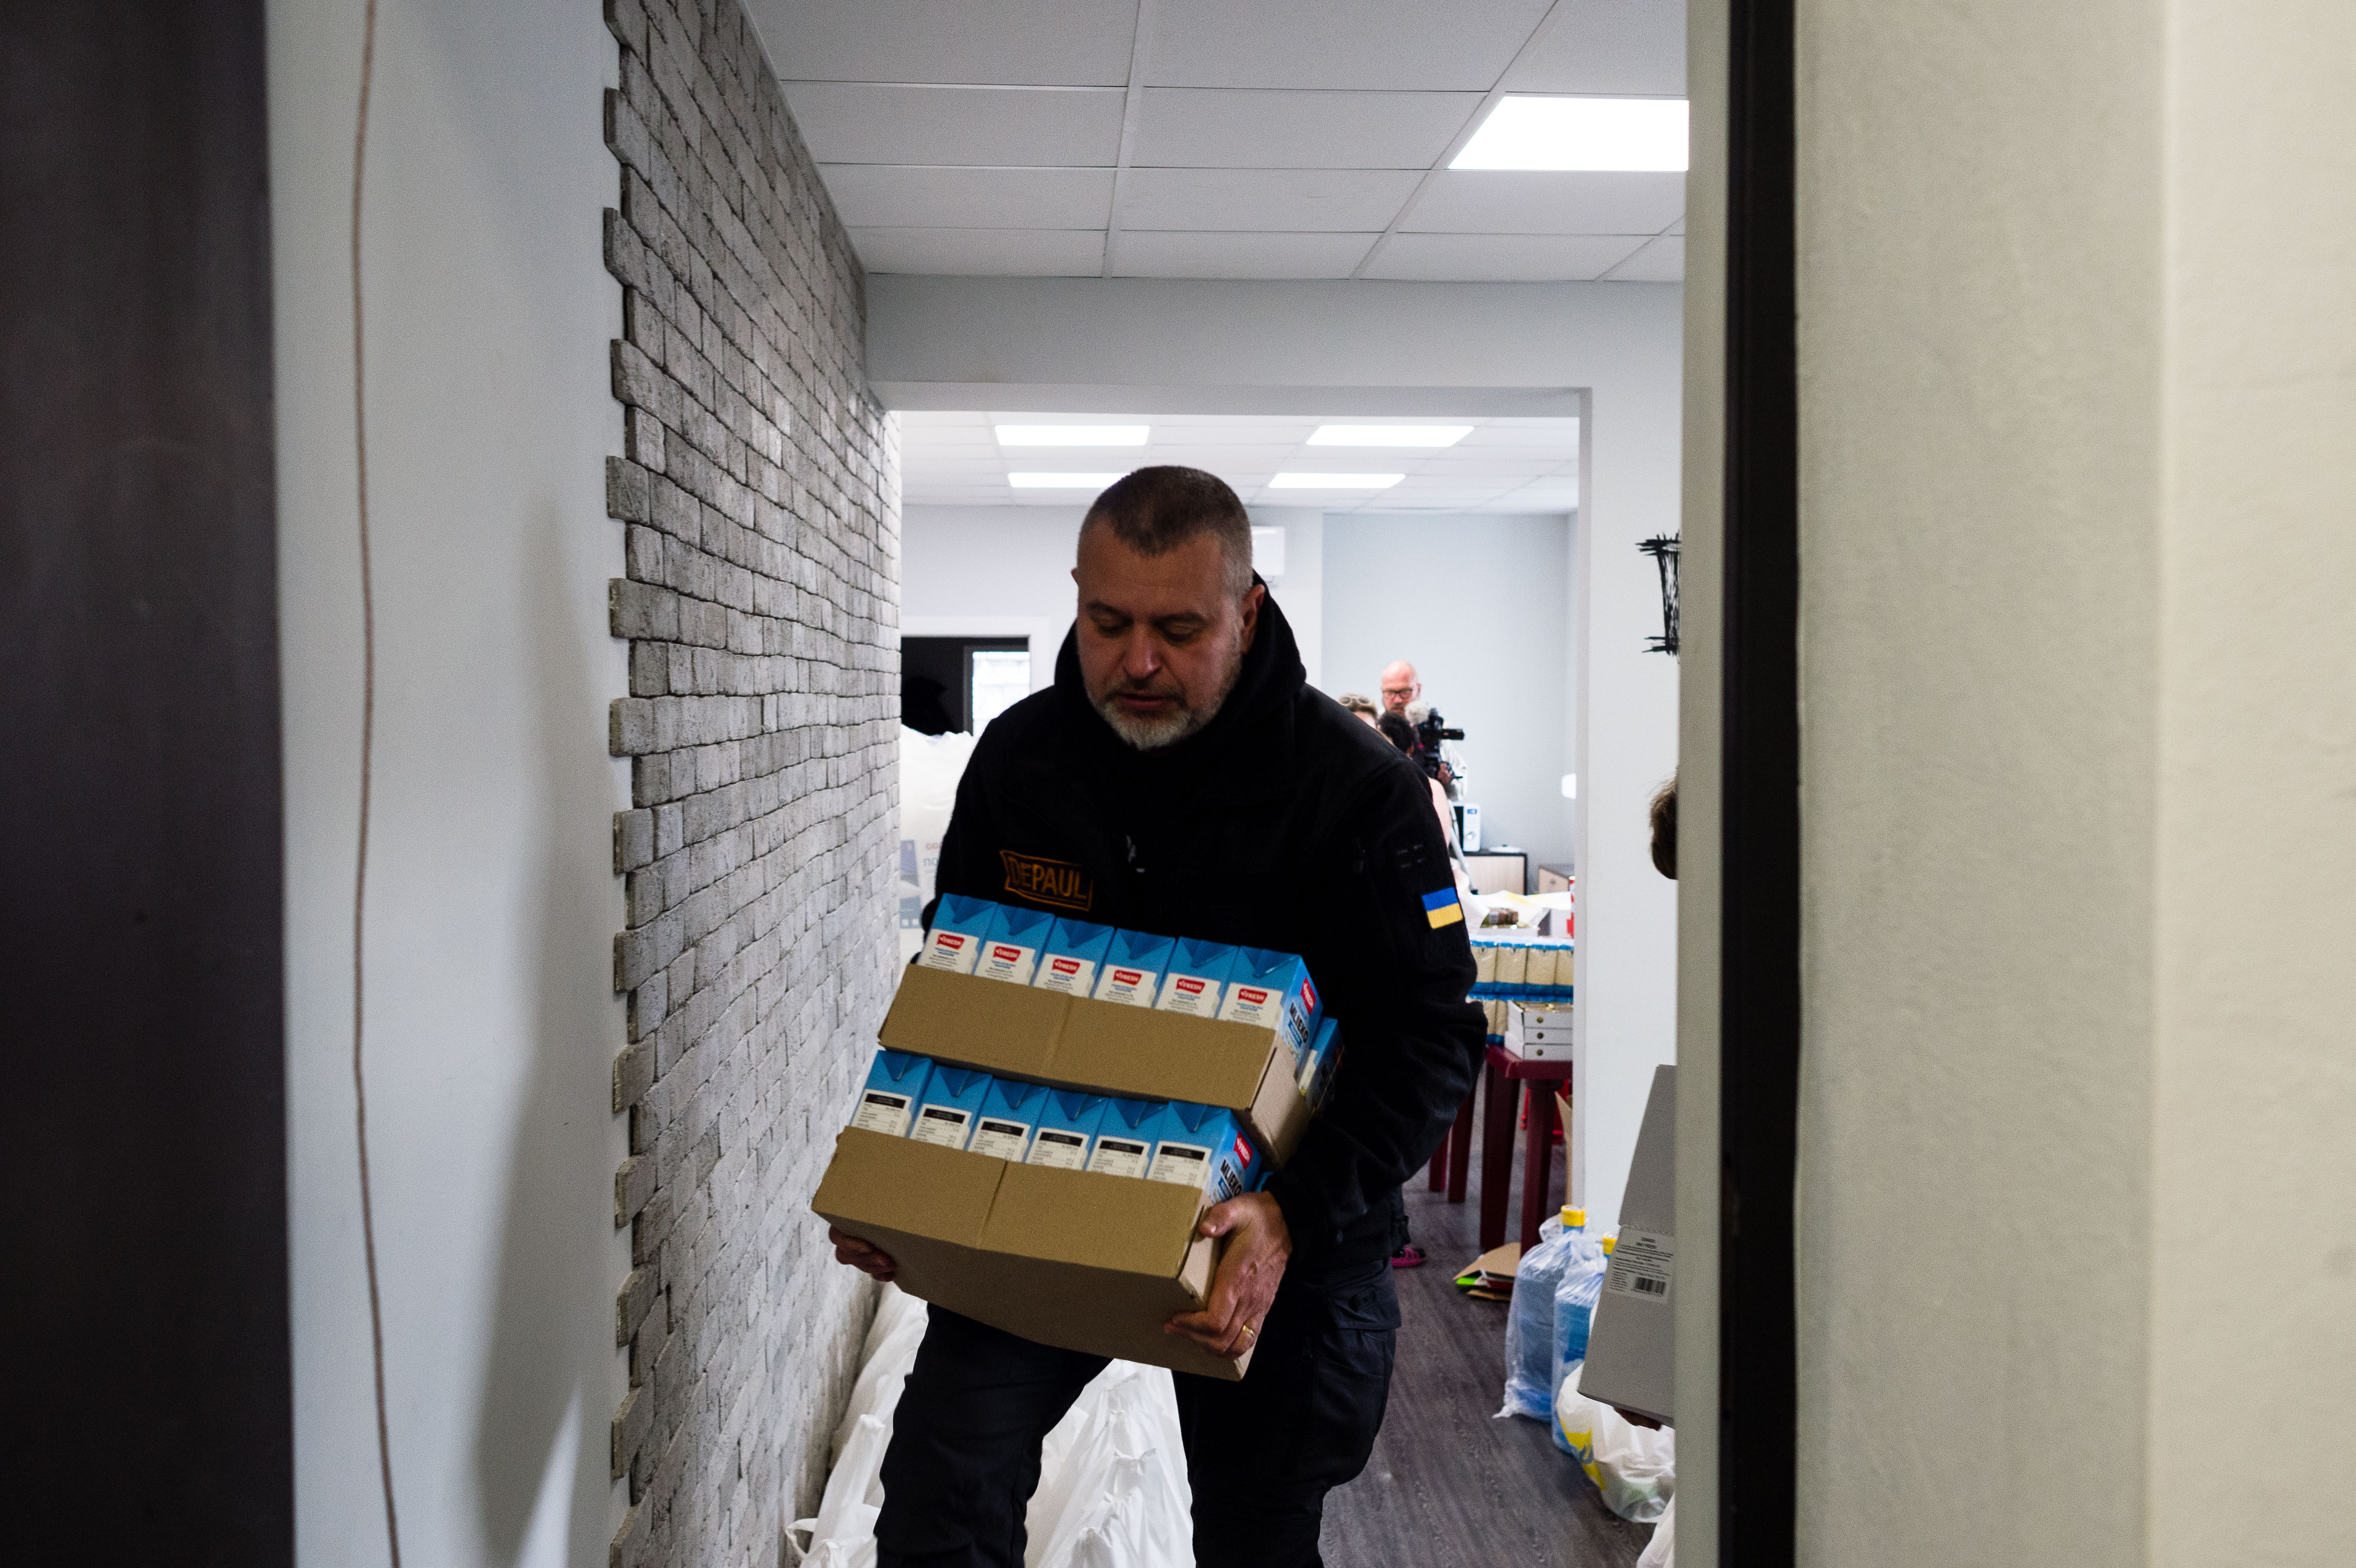 At a Day Centre run by Depaul International, Father Vitaliy Novak loads up food ready for distribution to people in need in Kharkiv, on 15th November 2022